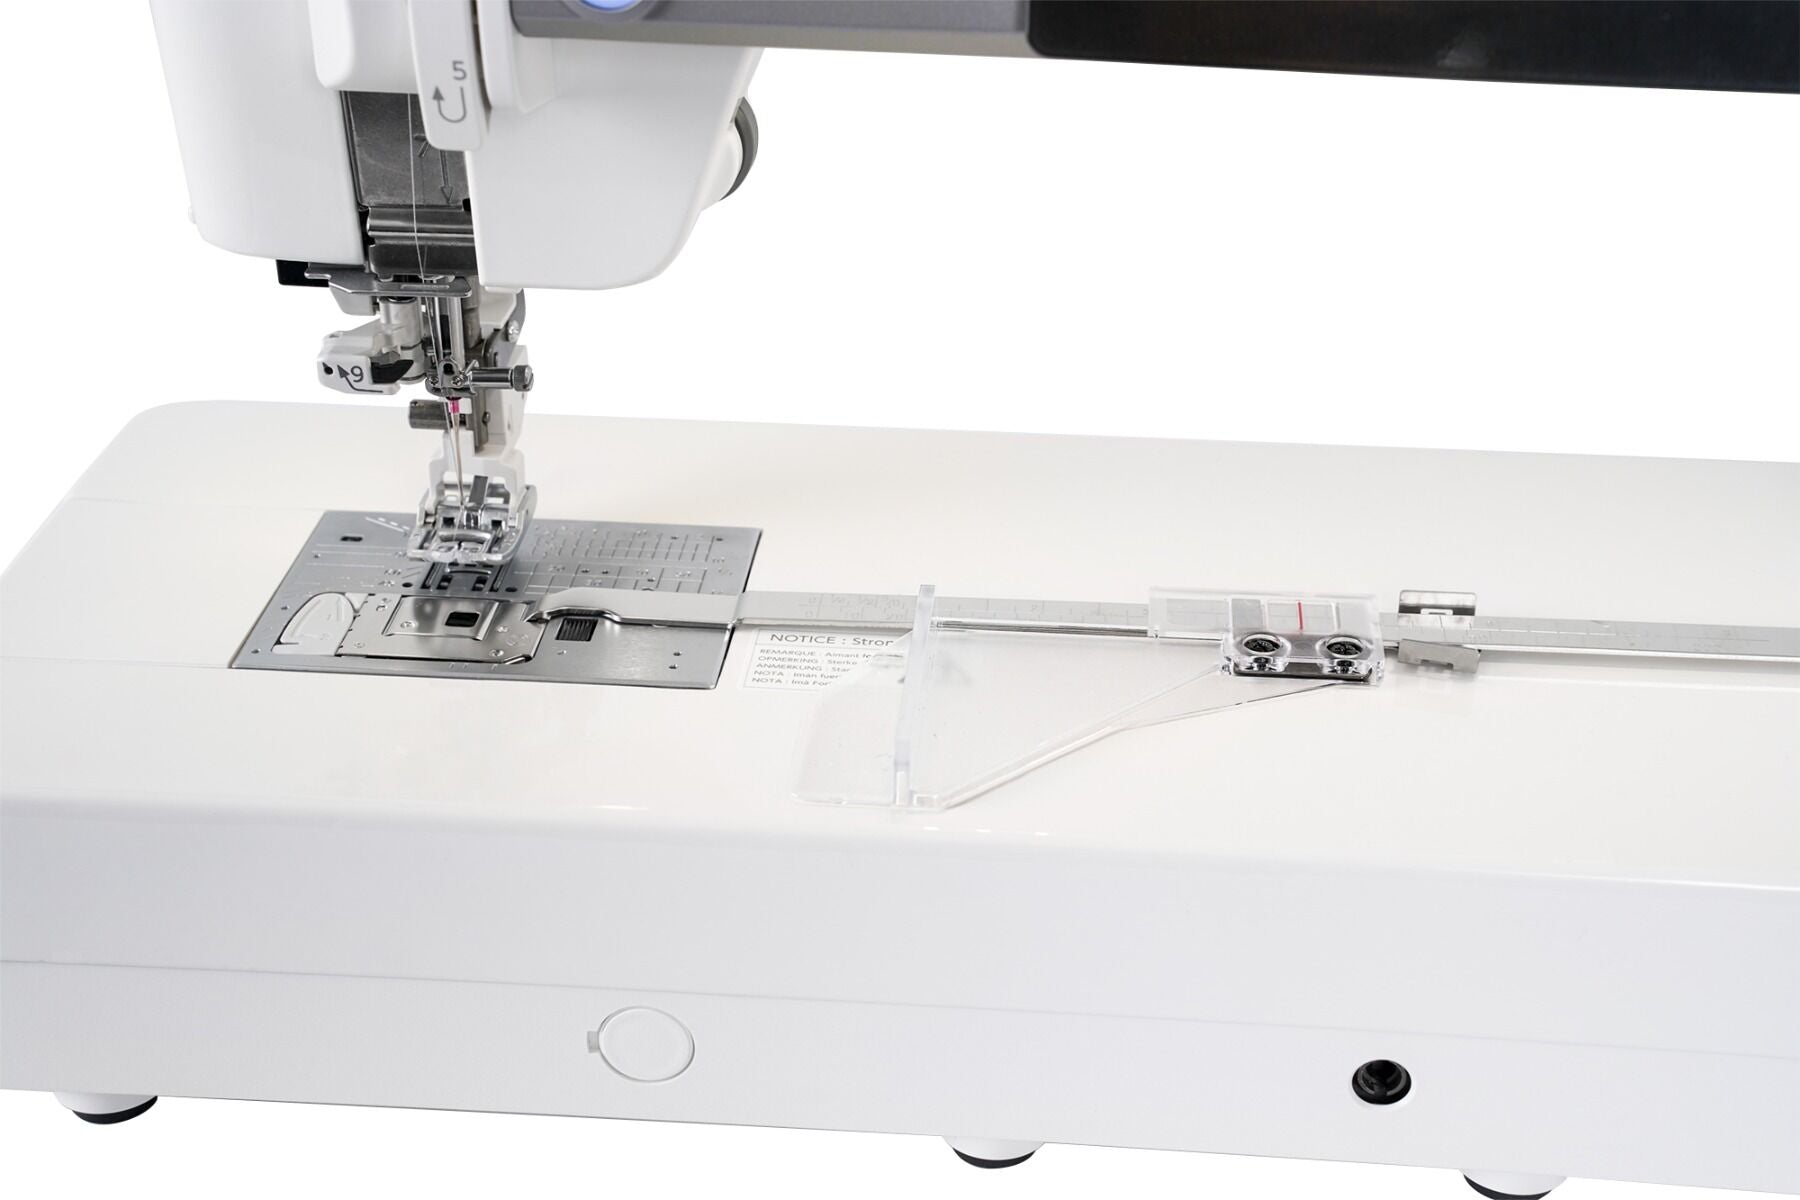 Janome Needles Special - Wellington Sewing Centre